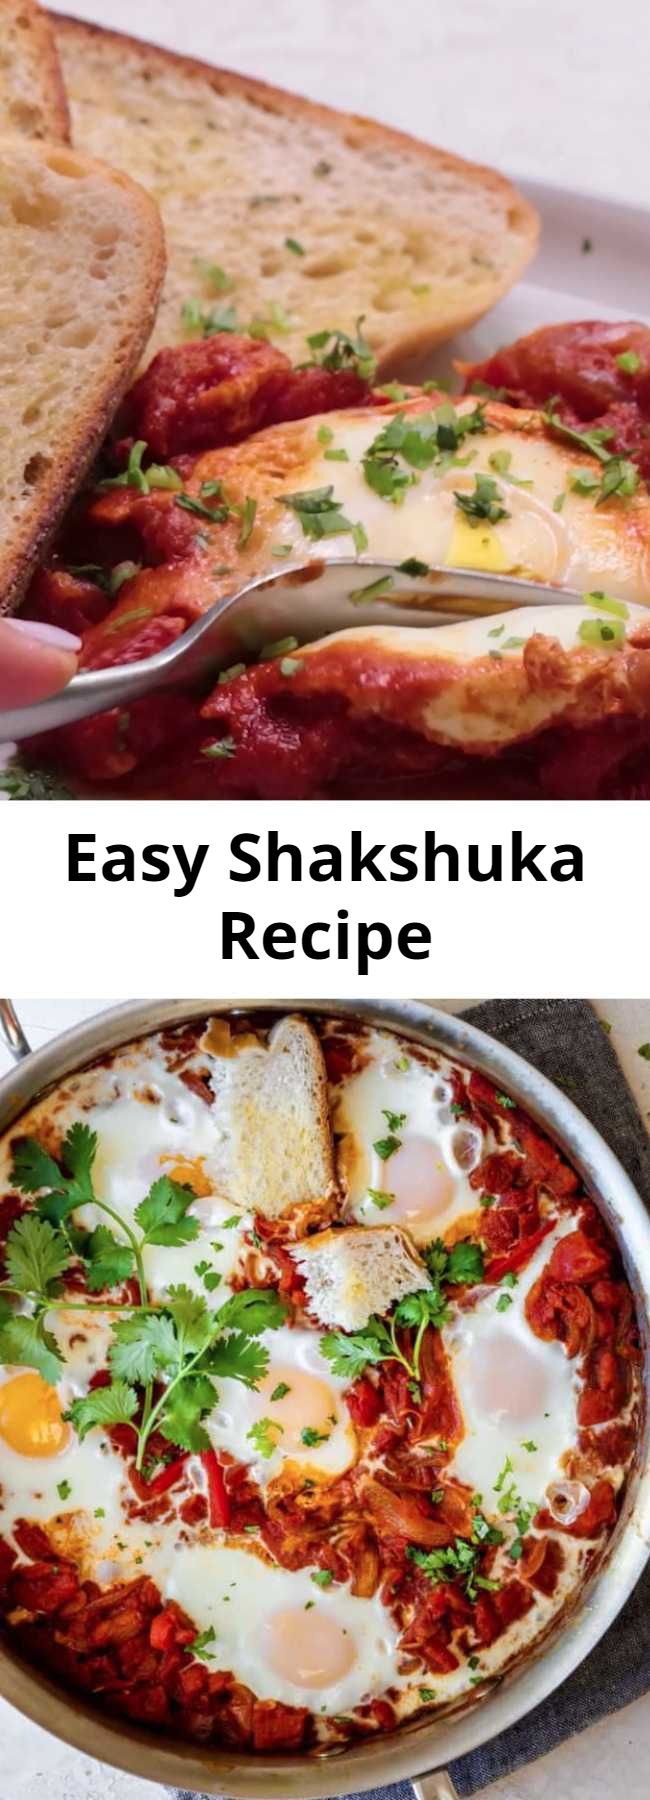 Easy Shakshuka Recipe - This Shakshuka Recipe is a popular Middle Eastern breakfast that is basically poached eggs in a spicy tomato sauce - it's vegetarian, easy and healthy! #breakfast